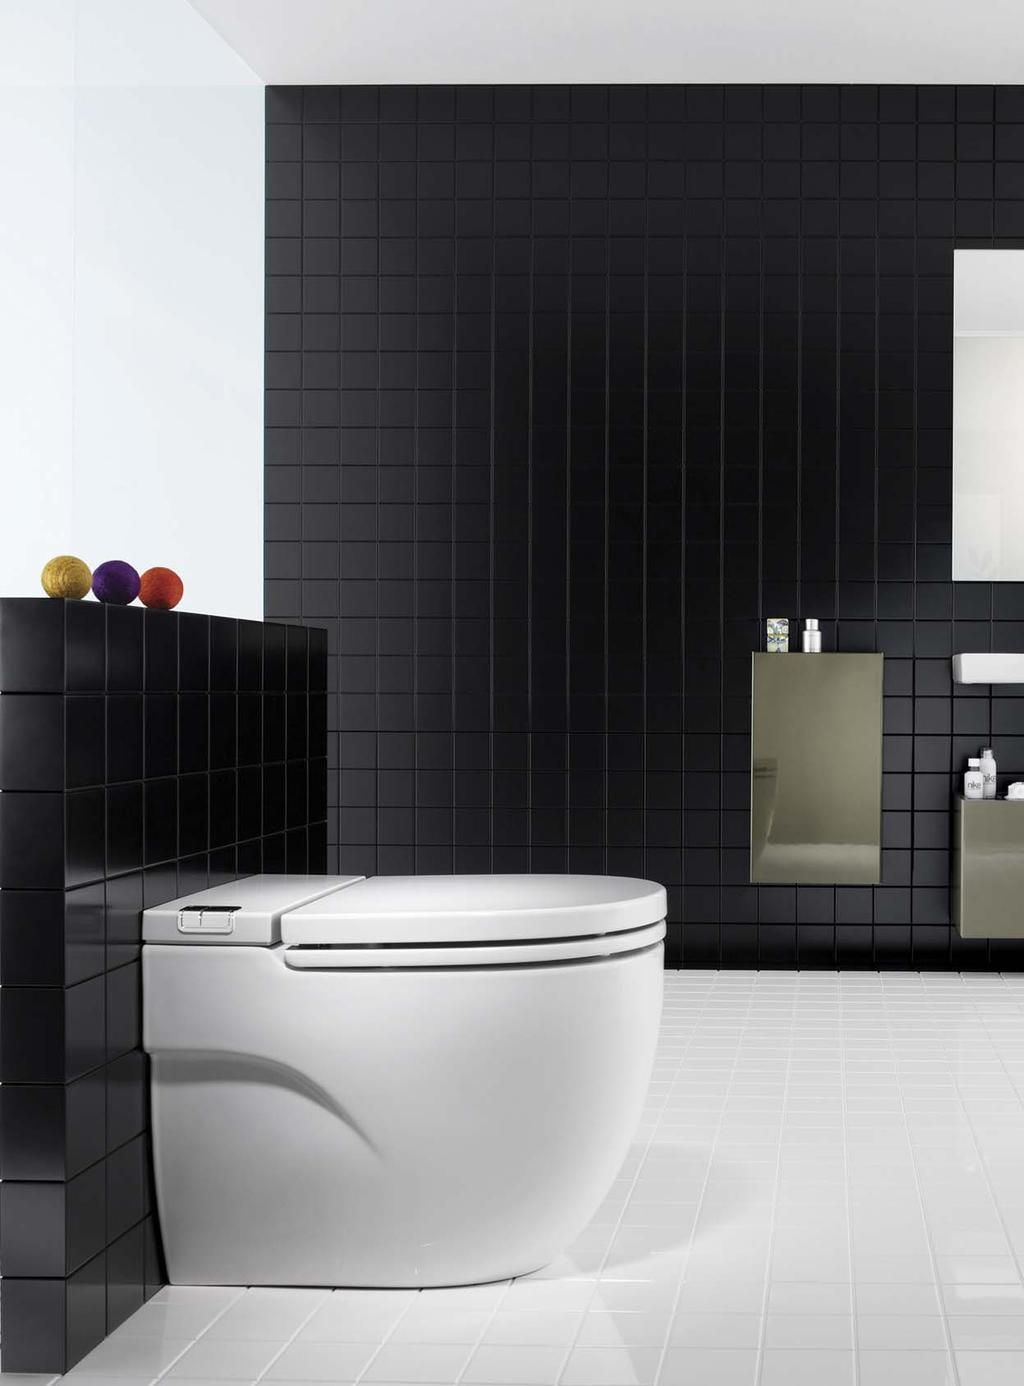 6 World fi rst in new toilet technology Toilet suites have been the cornerstone of bathrooms for the last few decades.